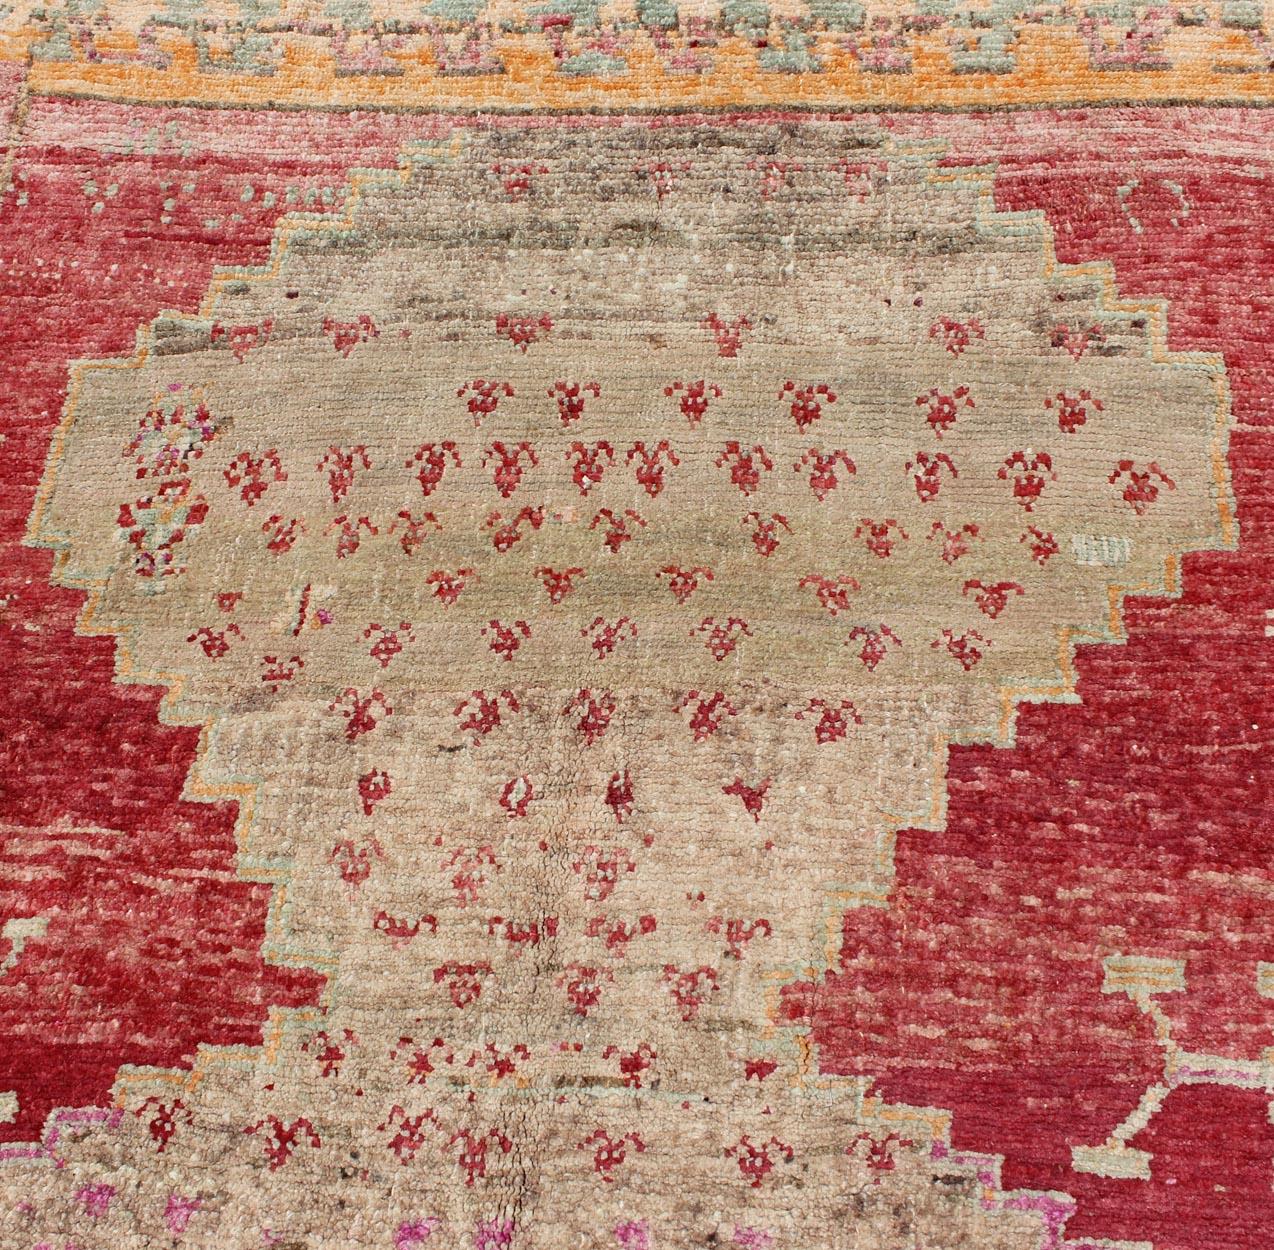 Wool Vibrant Turkish Vintage Runner in Faded Red, Coral, Orange, Pink and Green For Sale